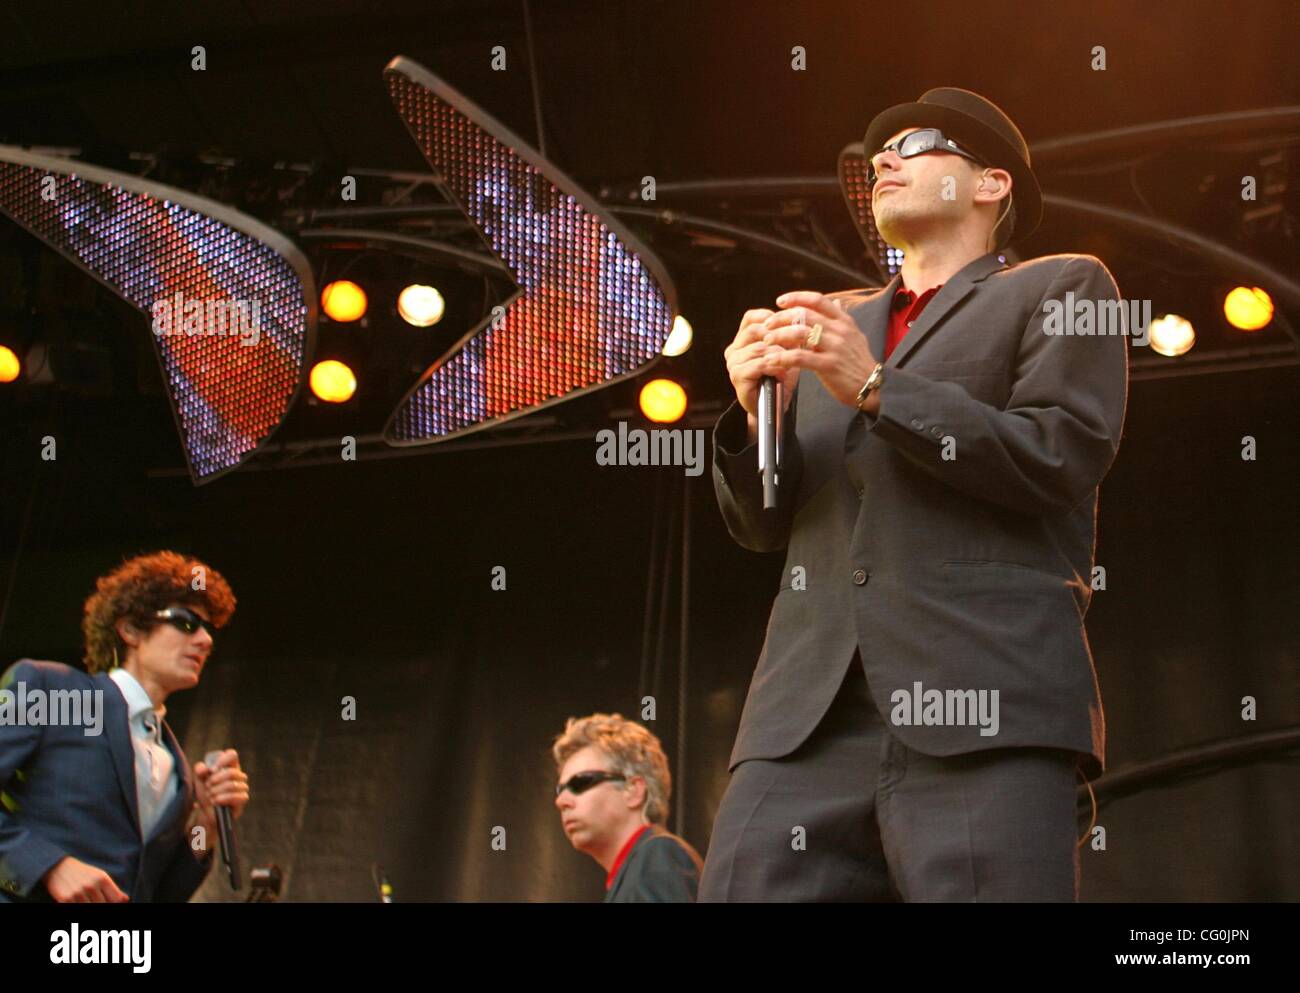 Jul 04, 2007 - Stockholm, SWEDEN - ADAM YAUCH (MCA), MICHAEL DIAMOND (Mike D) & ADAM HOROVITZ (Ad-rock) as musicians the 'Beastie Boys' perform live in concert at Grona Lund in Stockholm (Credit Image: © Ryan Noble/ZUMA Press) Stock Photo